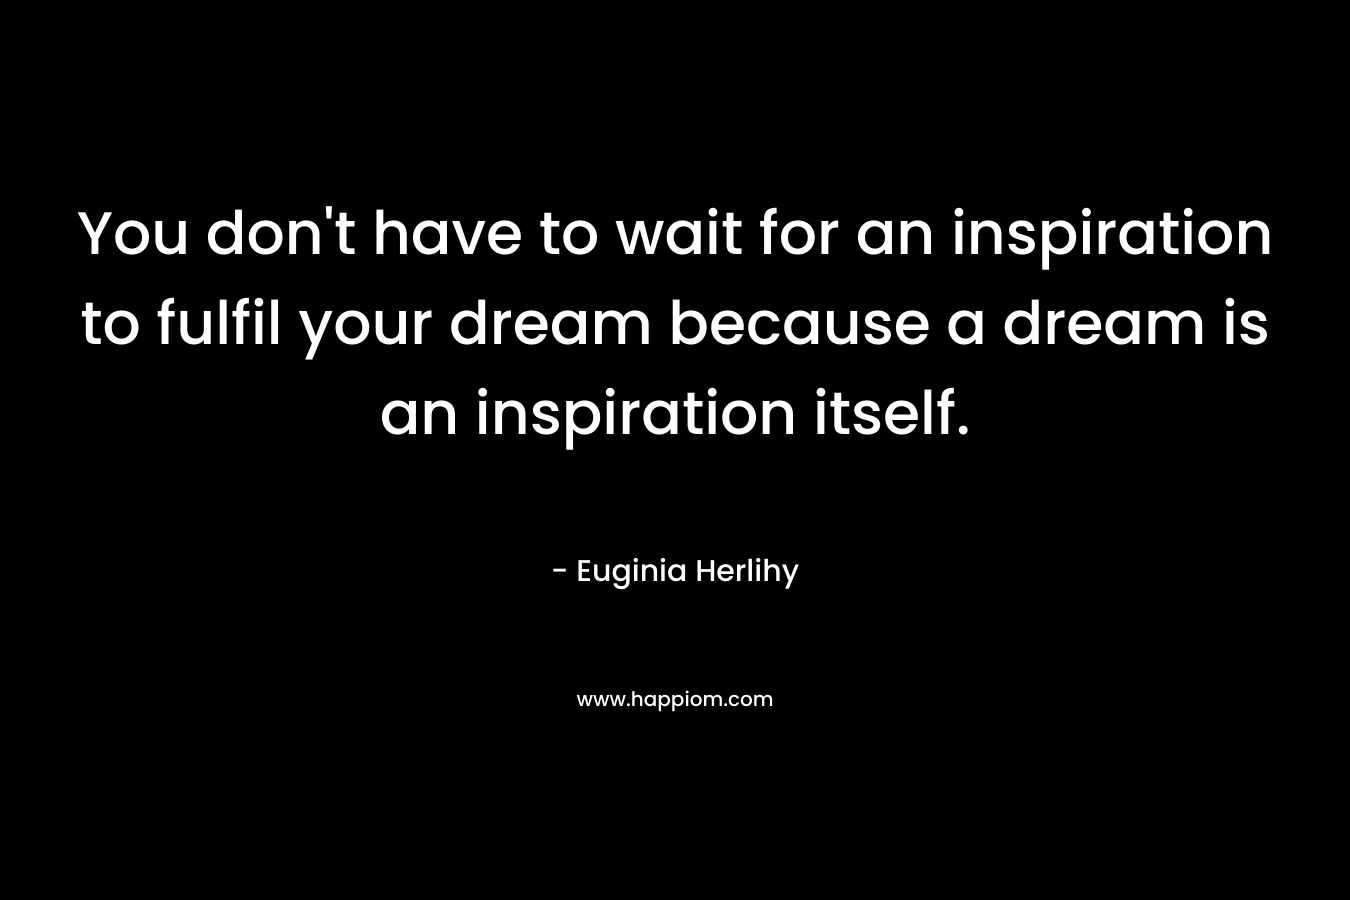 You don't have to wait for an inspiration to fulfil your dream because a dream is an inspiration itself.